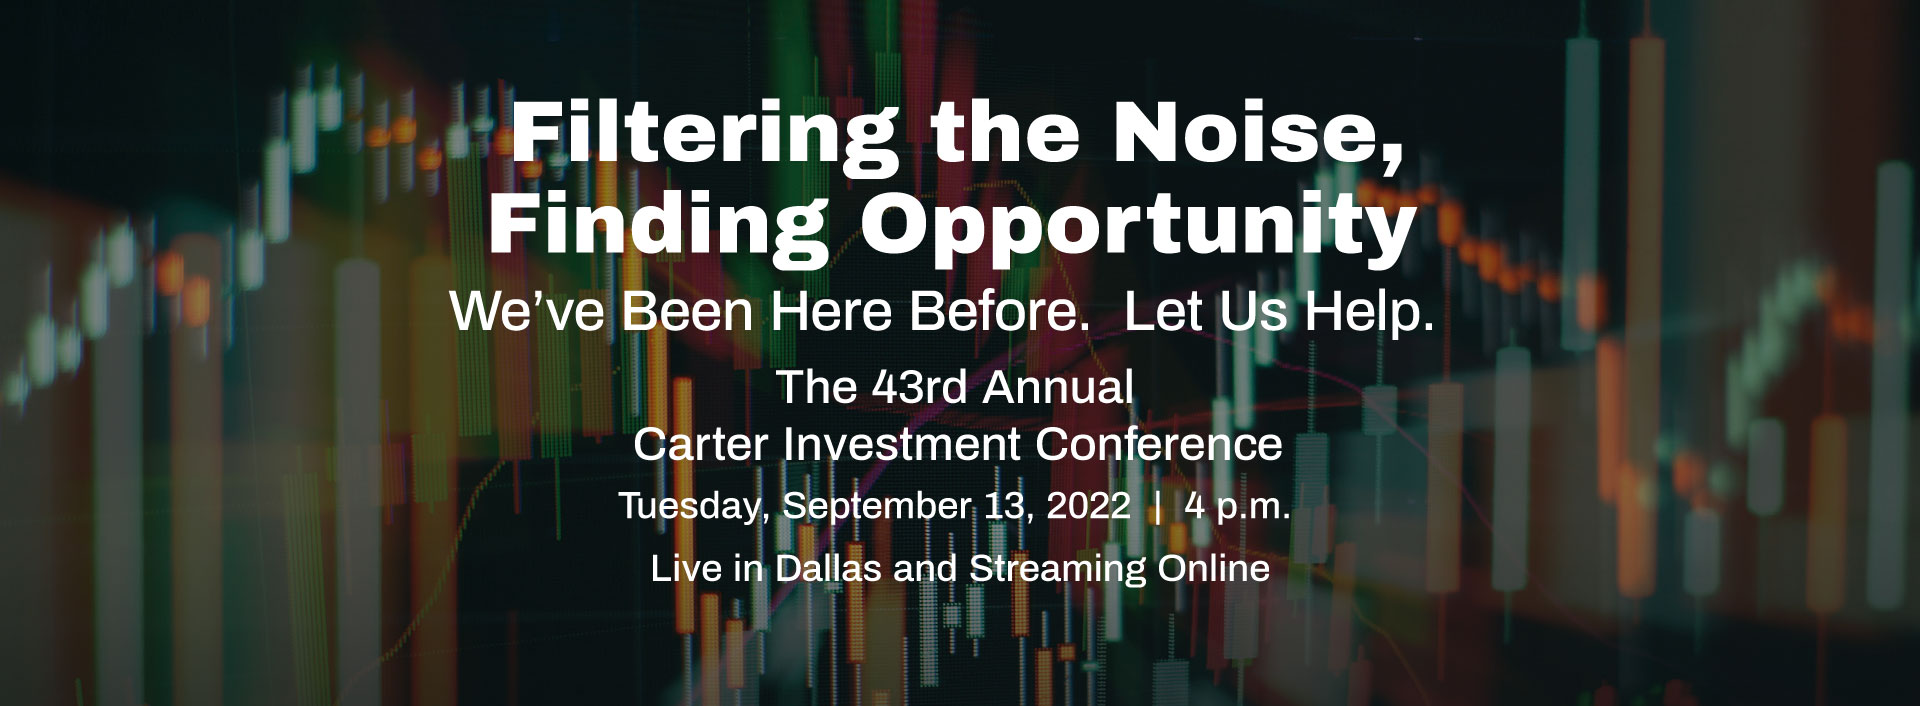 43rd annual carter investment conference